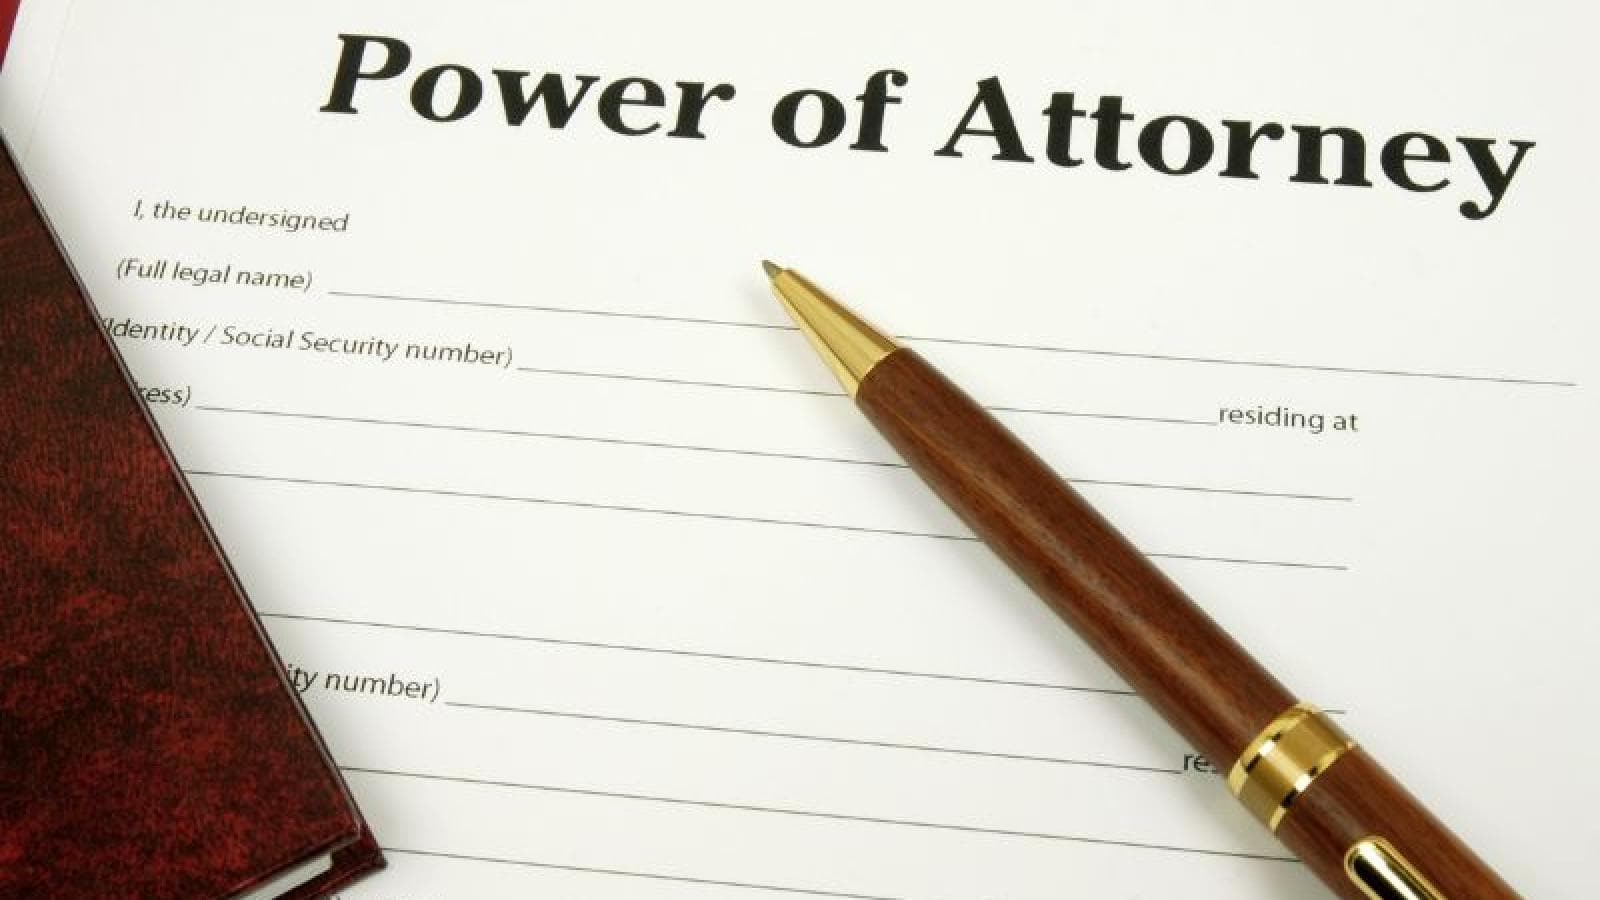 Power of Attorney document and a pen